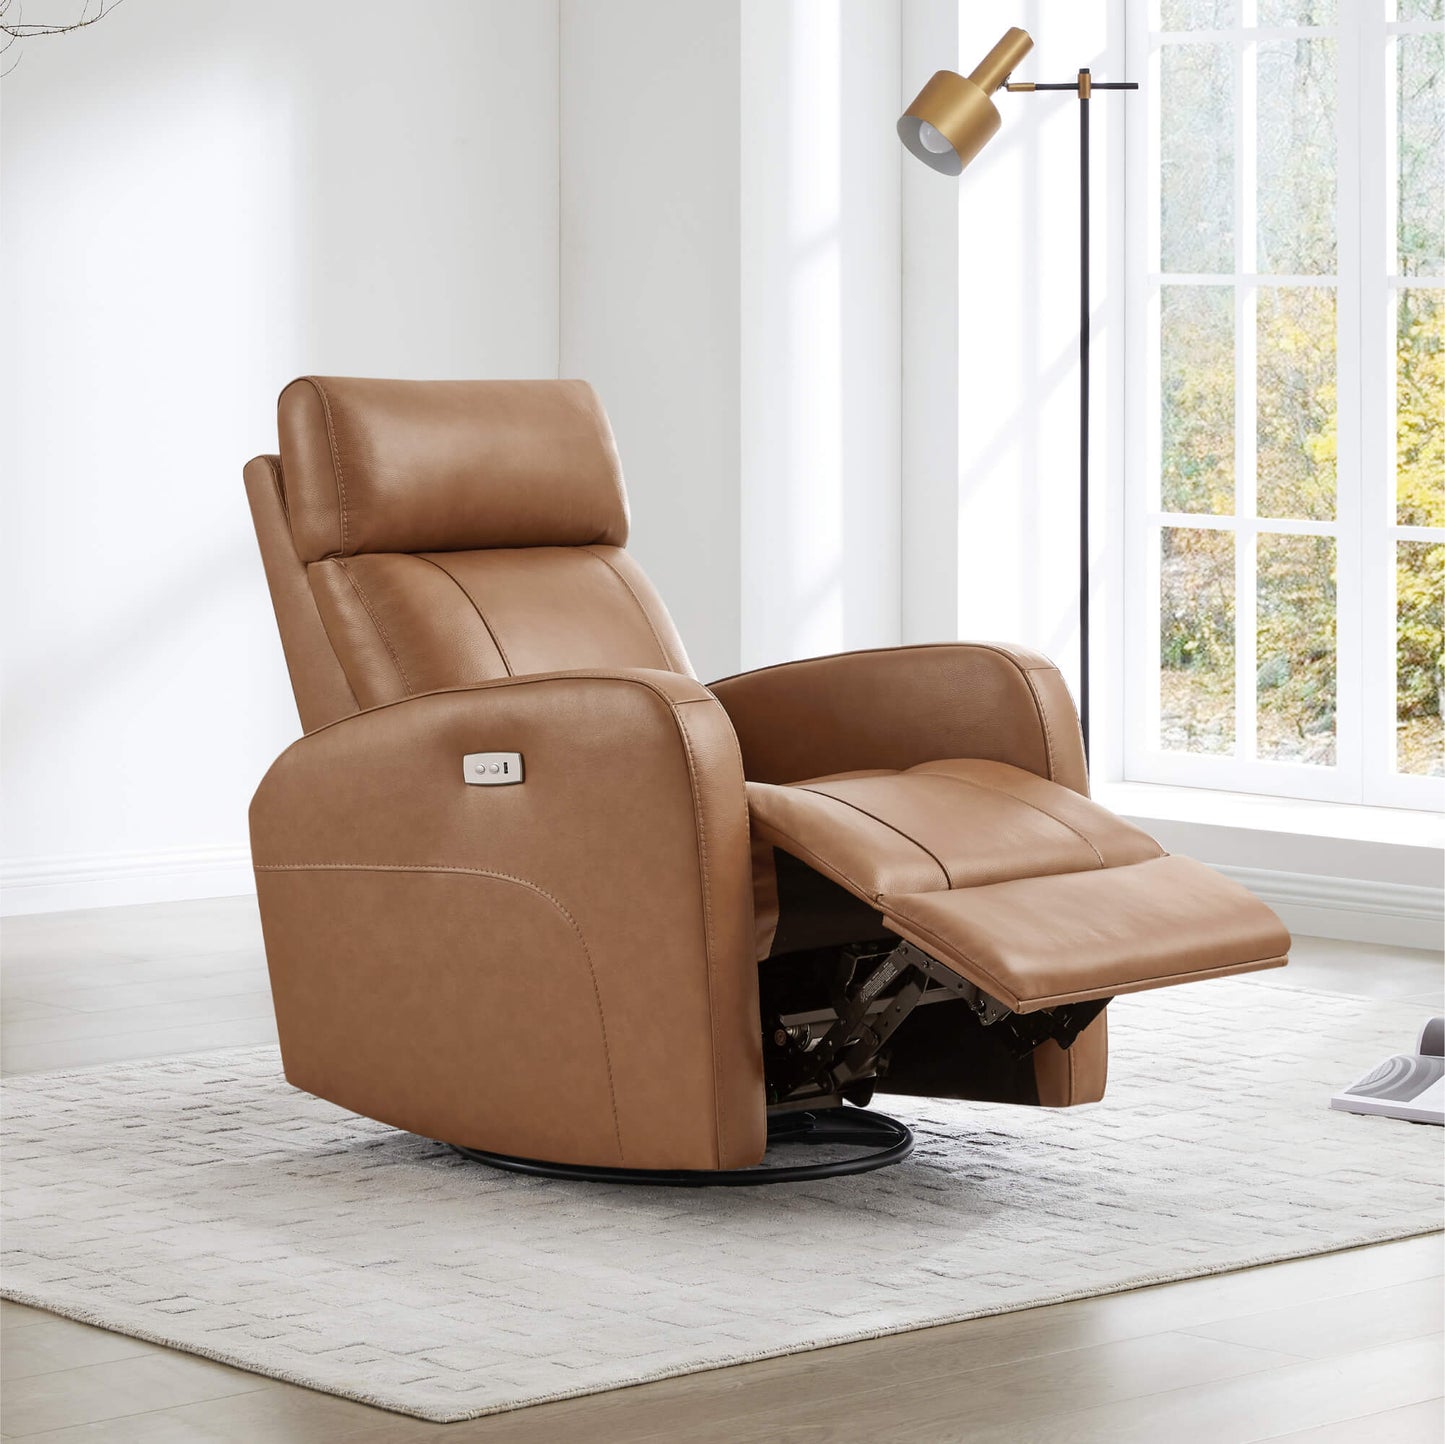 CHITA LIVING-Joy Power Swivel Recliner with Manual Headrest-Recliners-Genuine Leather-Saddle Brown-